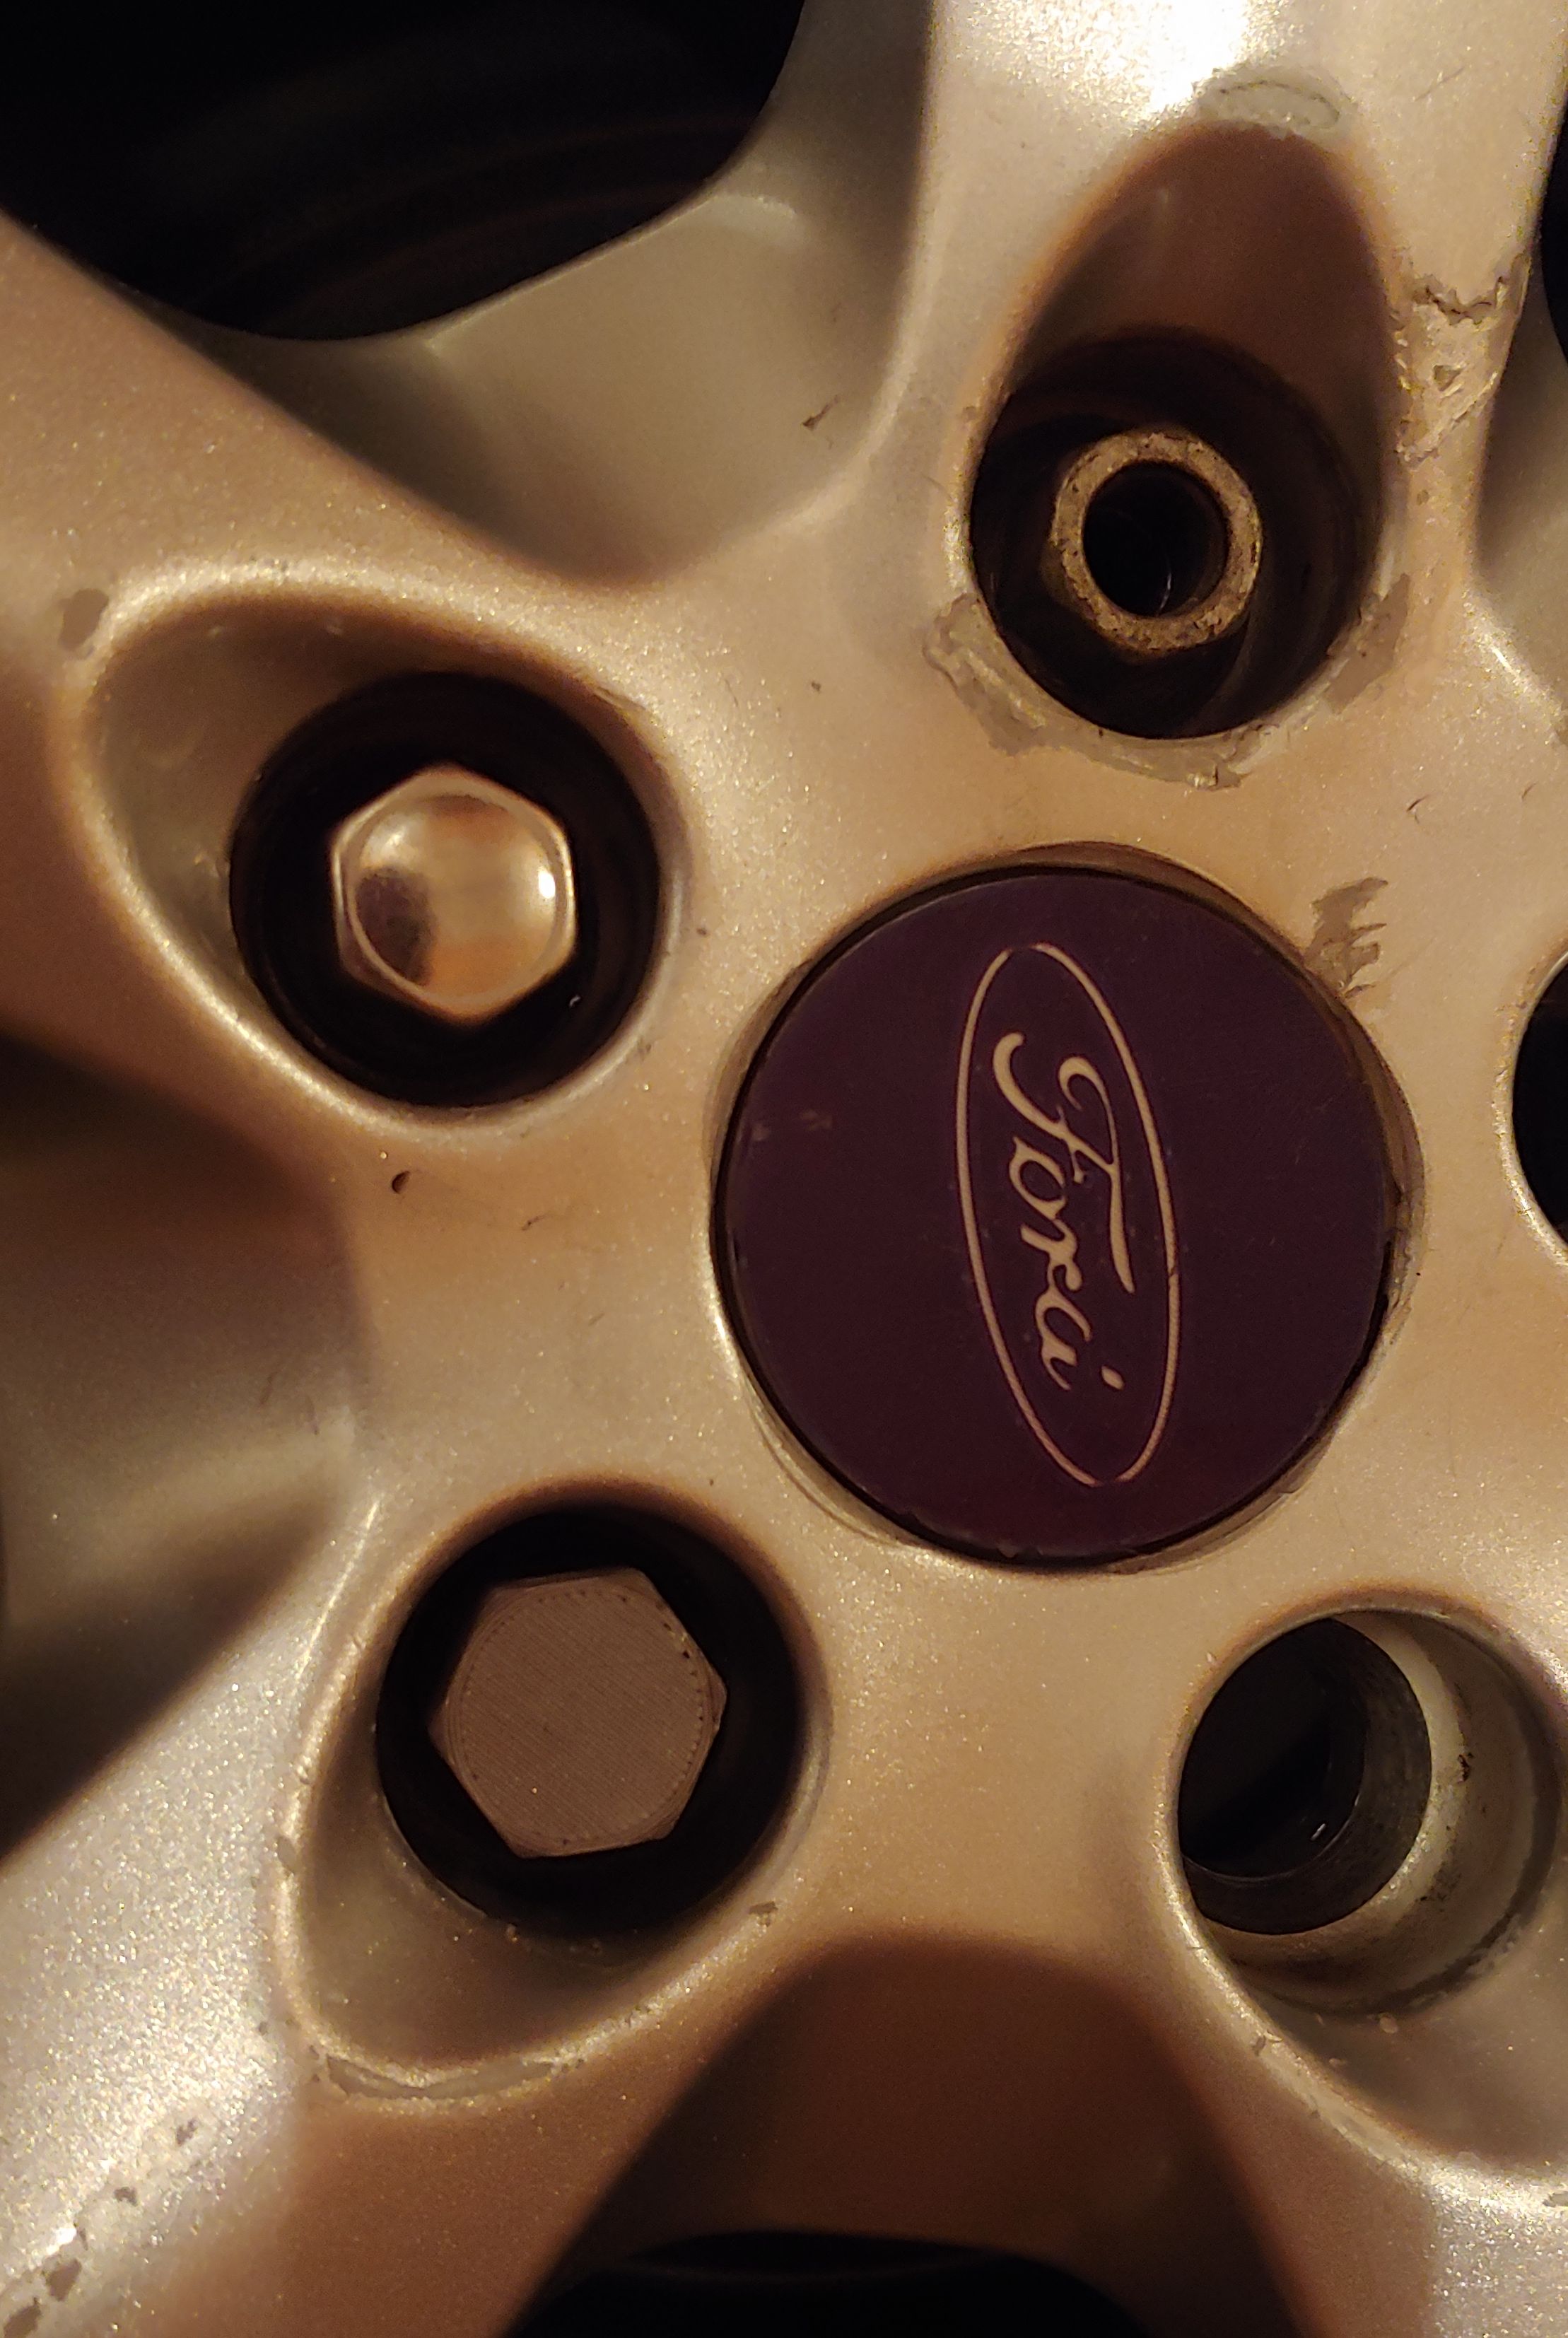 Ford wheel nut cover